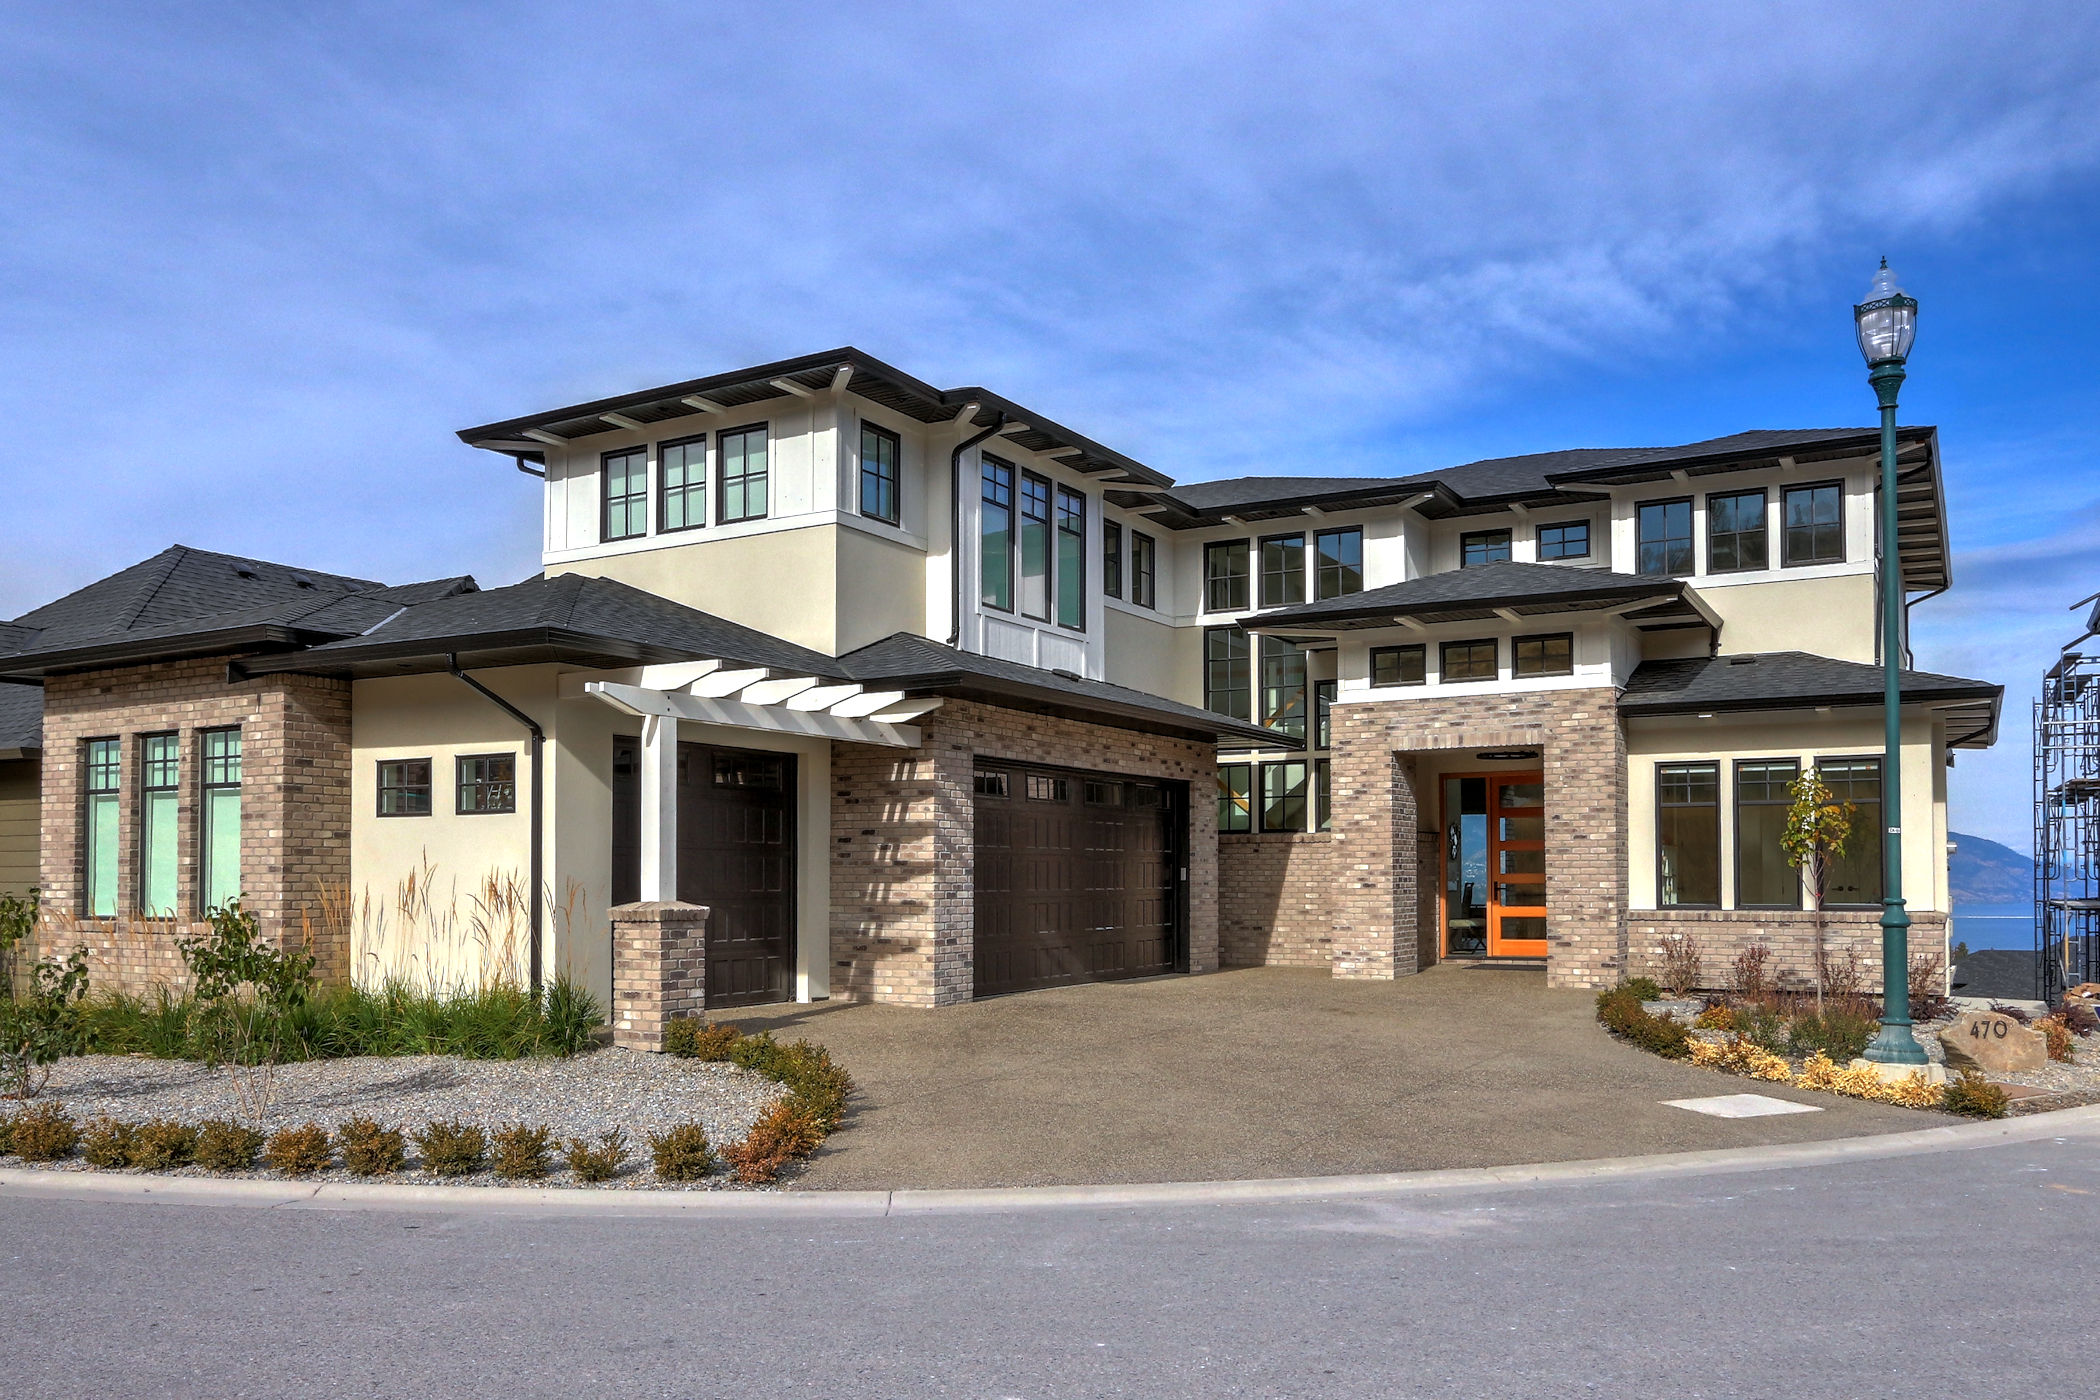 470 Rockview Lane front view of custom home exterior, built by Stark Homes